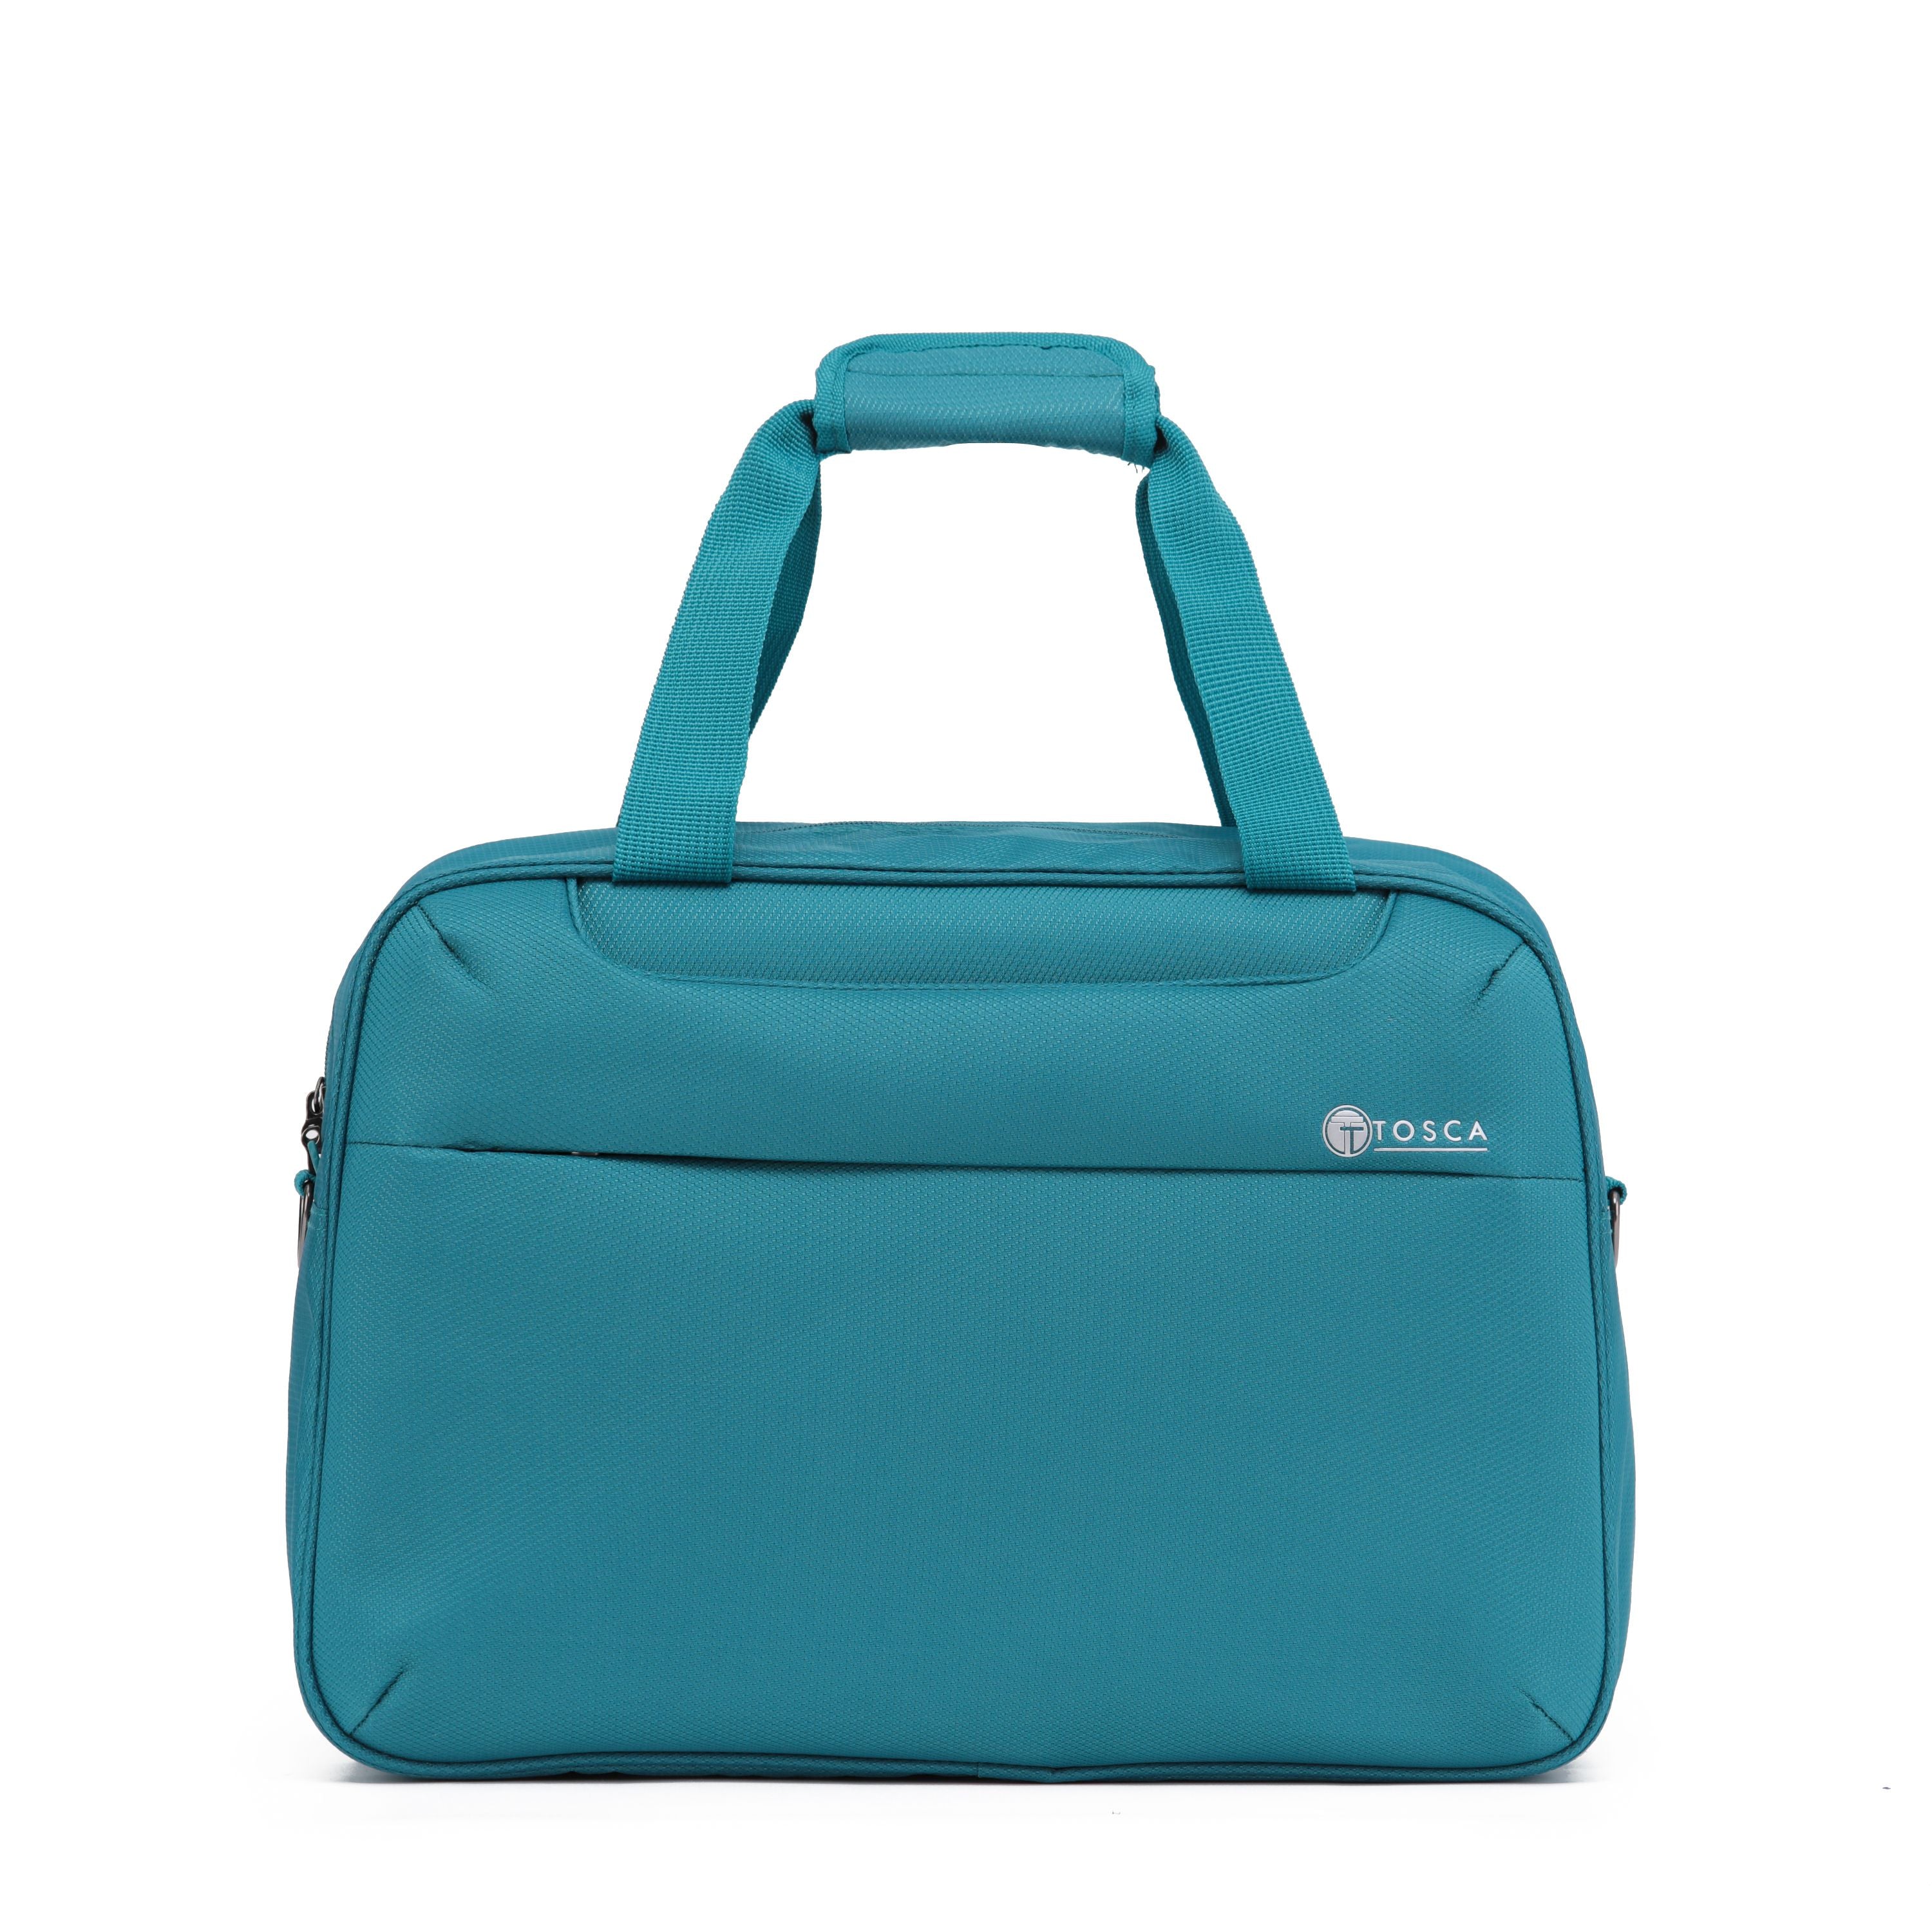 Tosca - So Lite 3.0 Onboard Tote - Teal